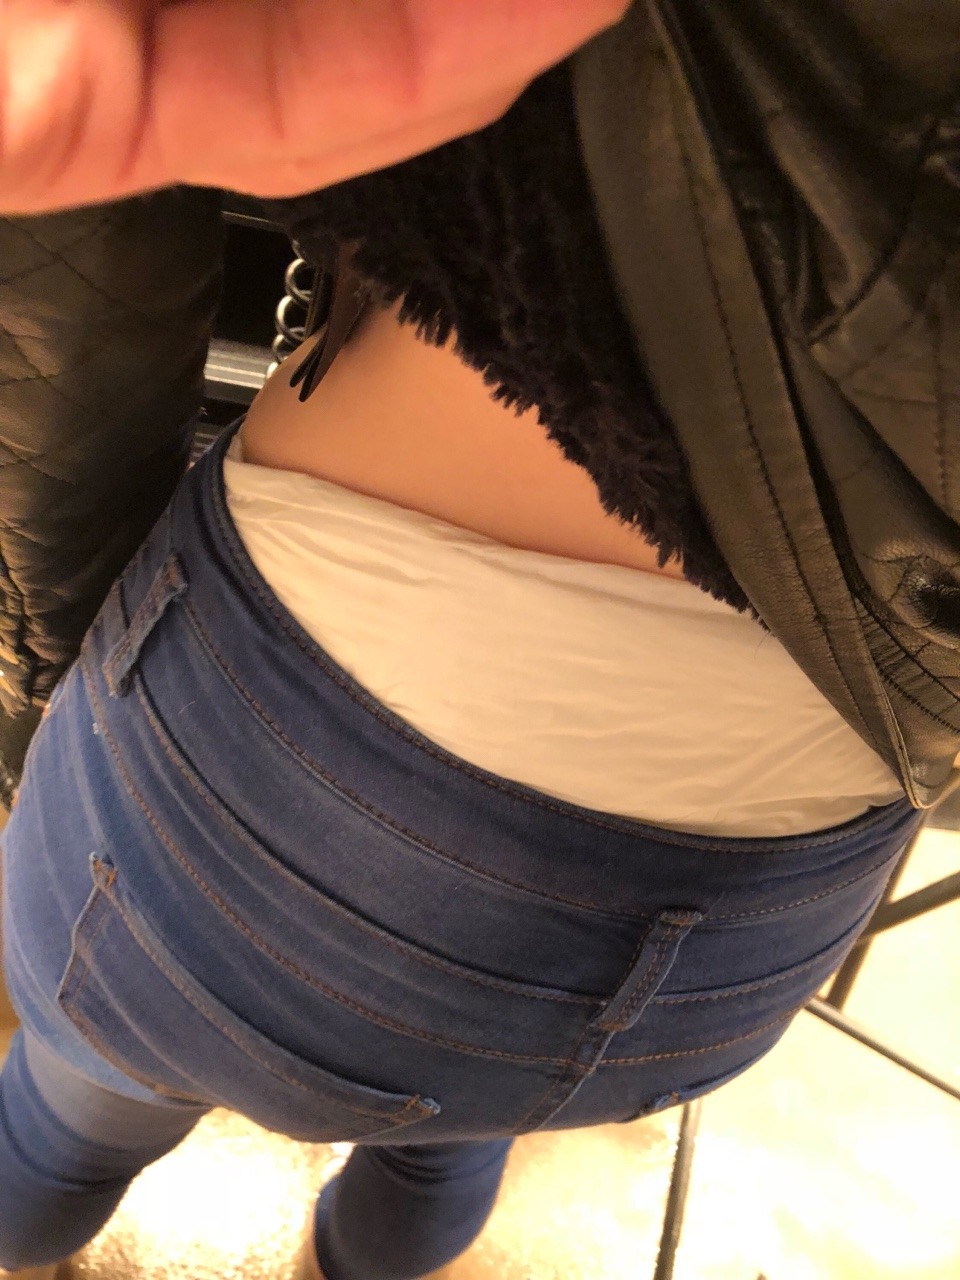 Candid Pantyhose Waistband In Jeans